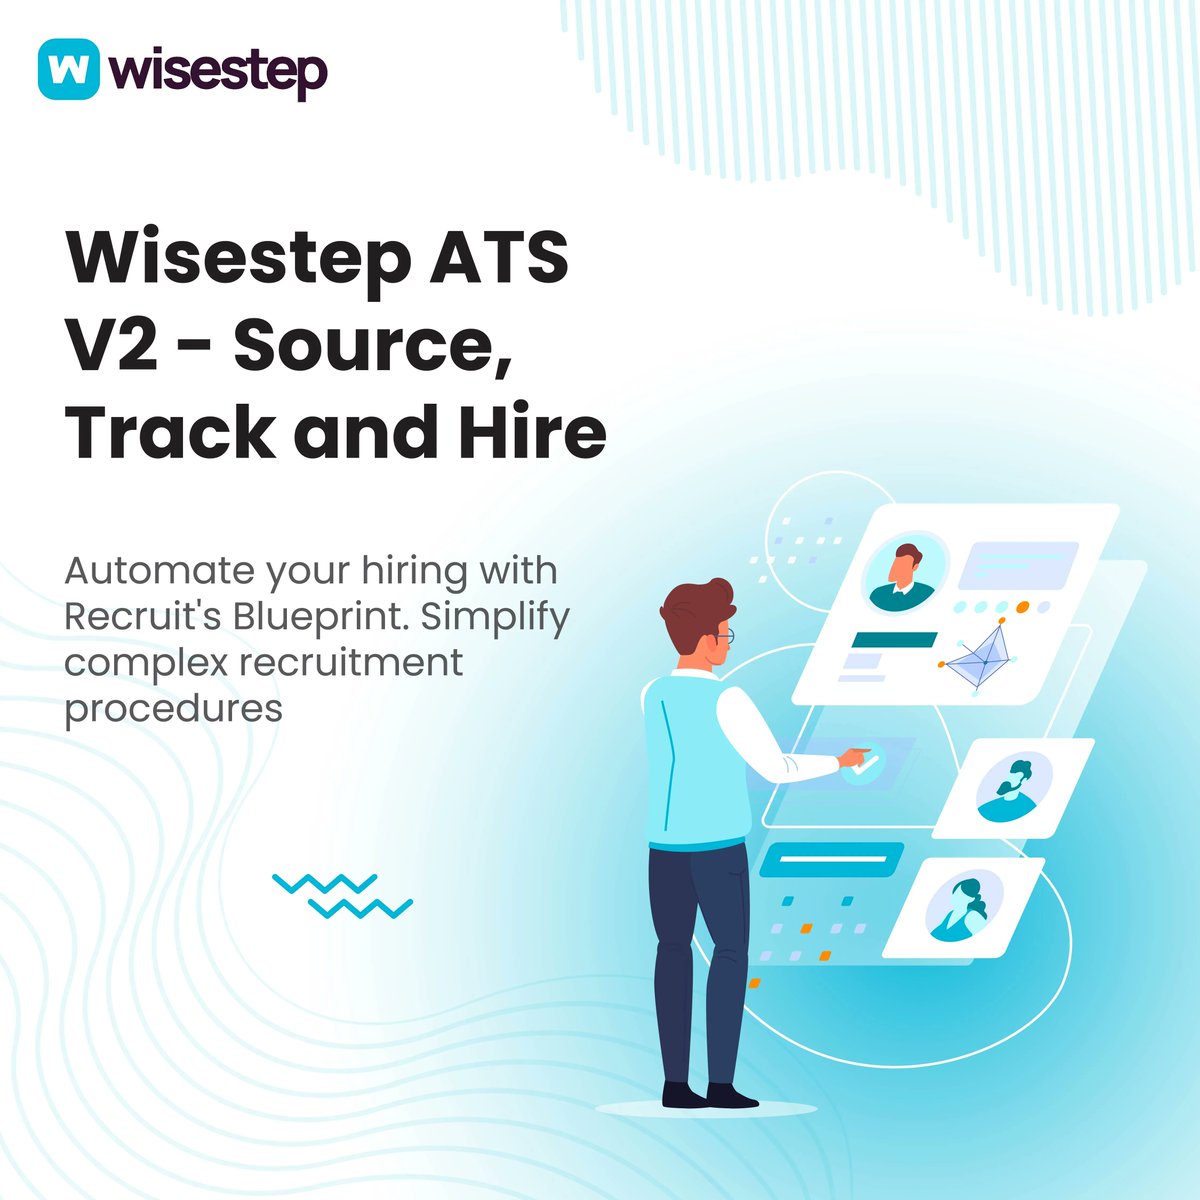 Say goodbye to manual process of handling your hiring!  Wisestep ATS provides a seamless digital workflow for managing candidate profiles and comunication. 

Book a demo now to know more about Wisestep ATS

buff.ly/3SywYr8

#ATS #digitalworkflow #recruitment #WisestepATS